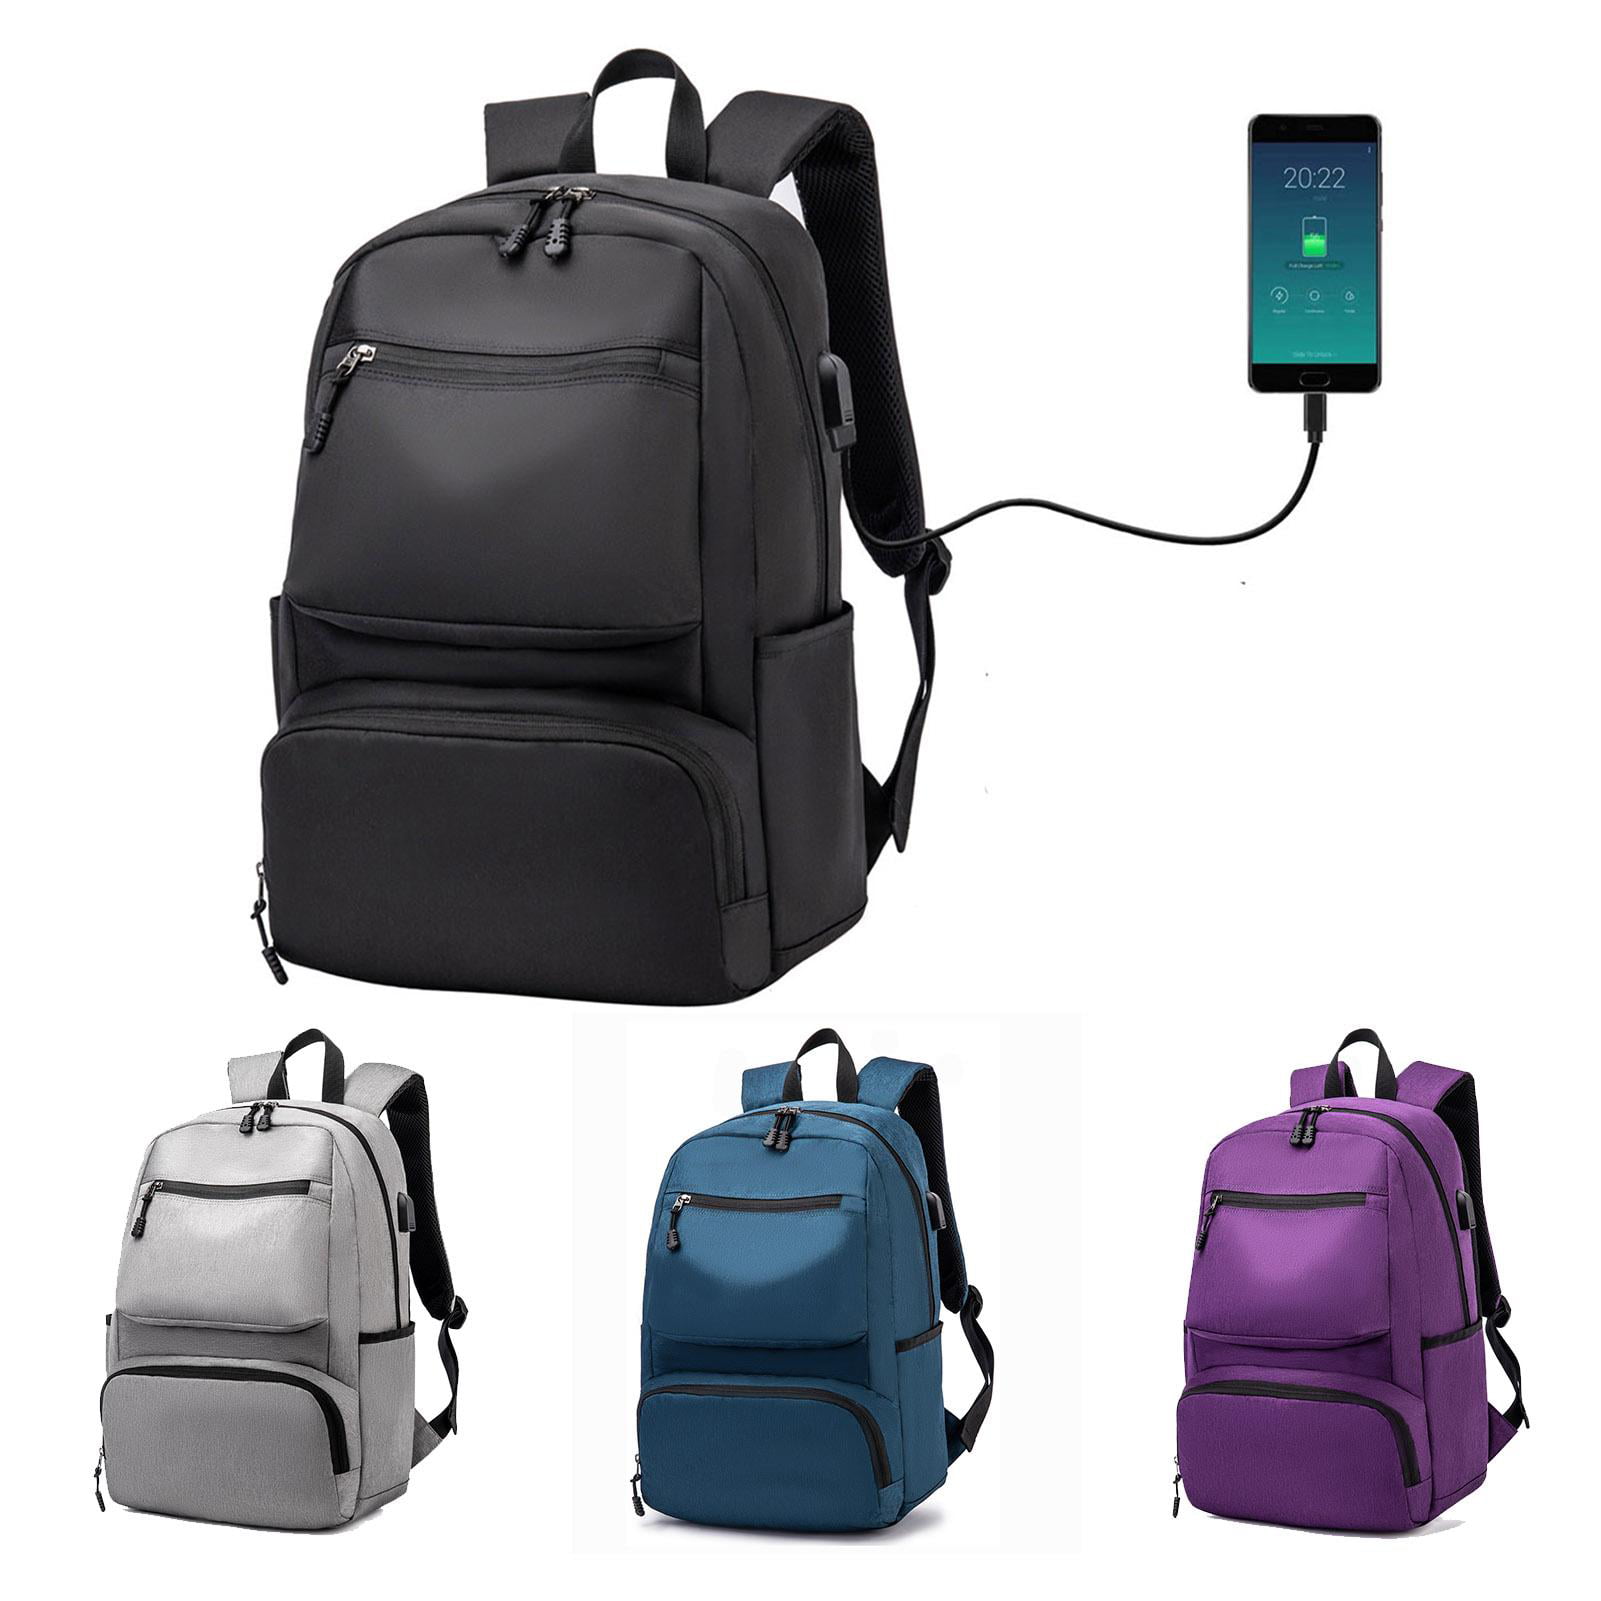 USB Neutral School Leisure Backpack Oxford Canvas Laptop Fashion Men Backpack grey 12 Inches 